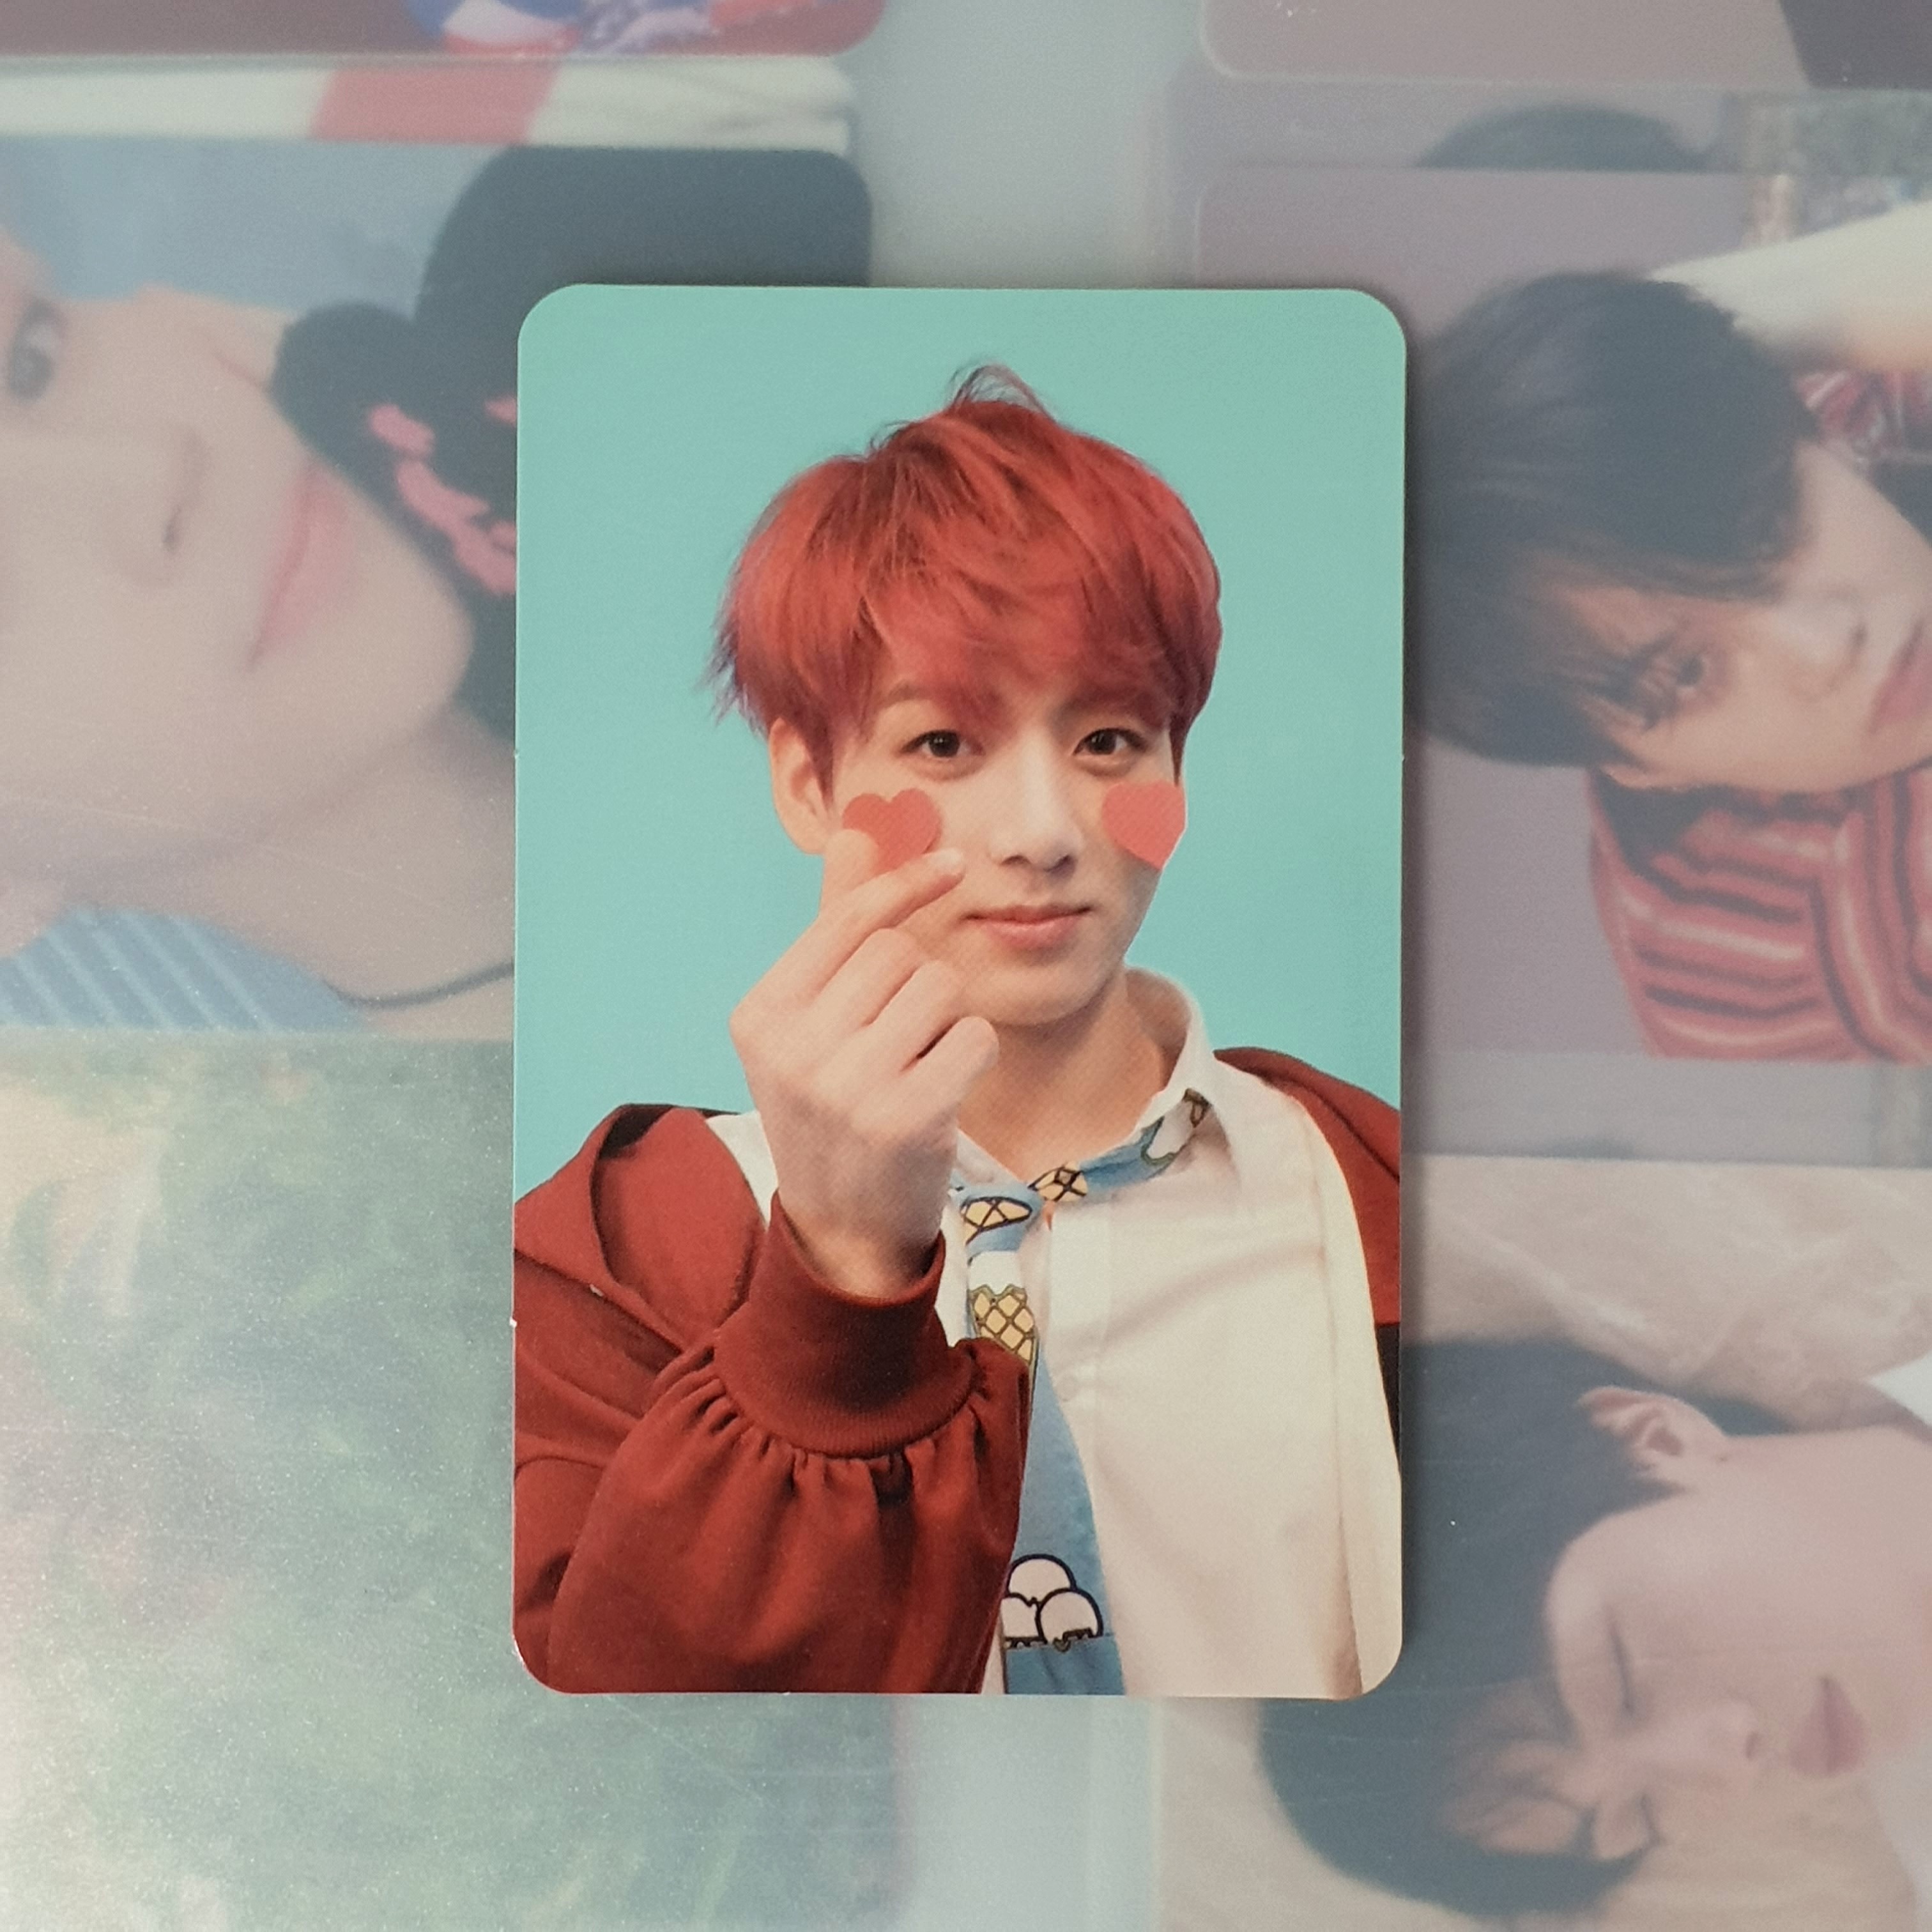 BTS Jungkook Love Yourself ANSWER F Version Photocard Lys Entertainment K Wave On Carousell